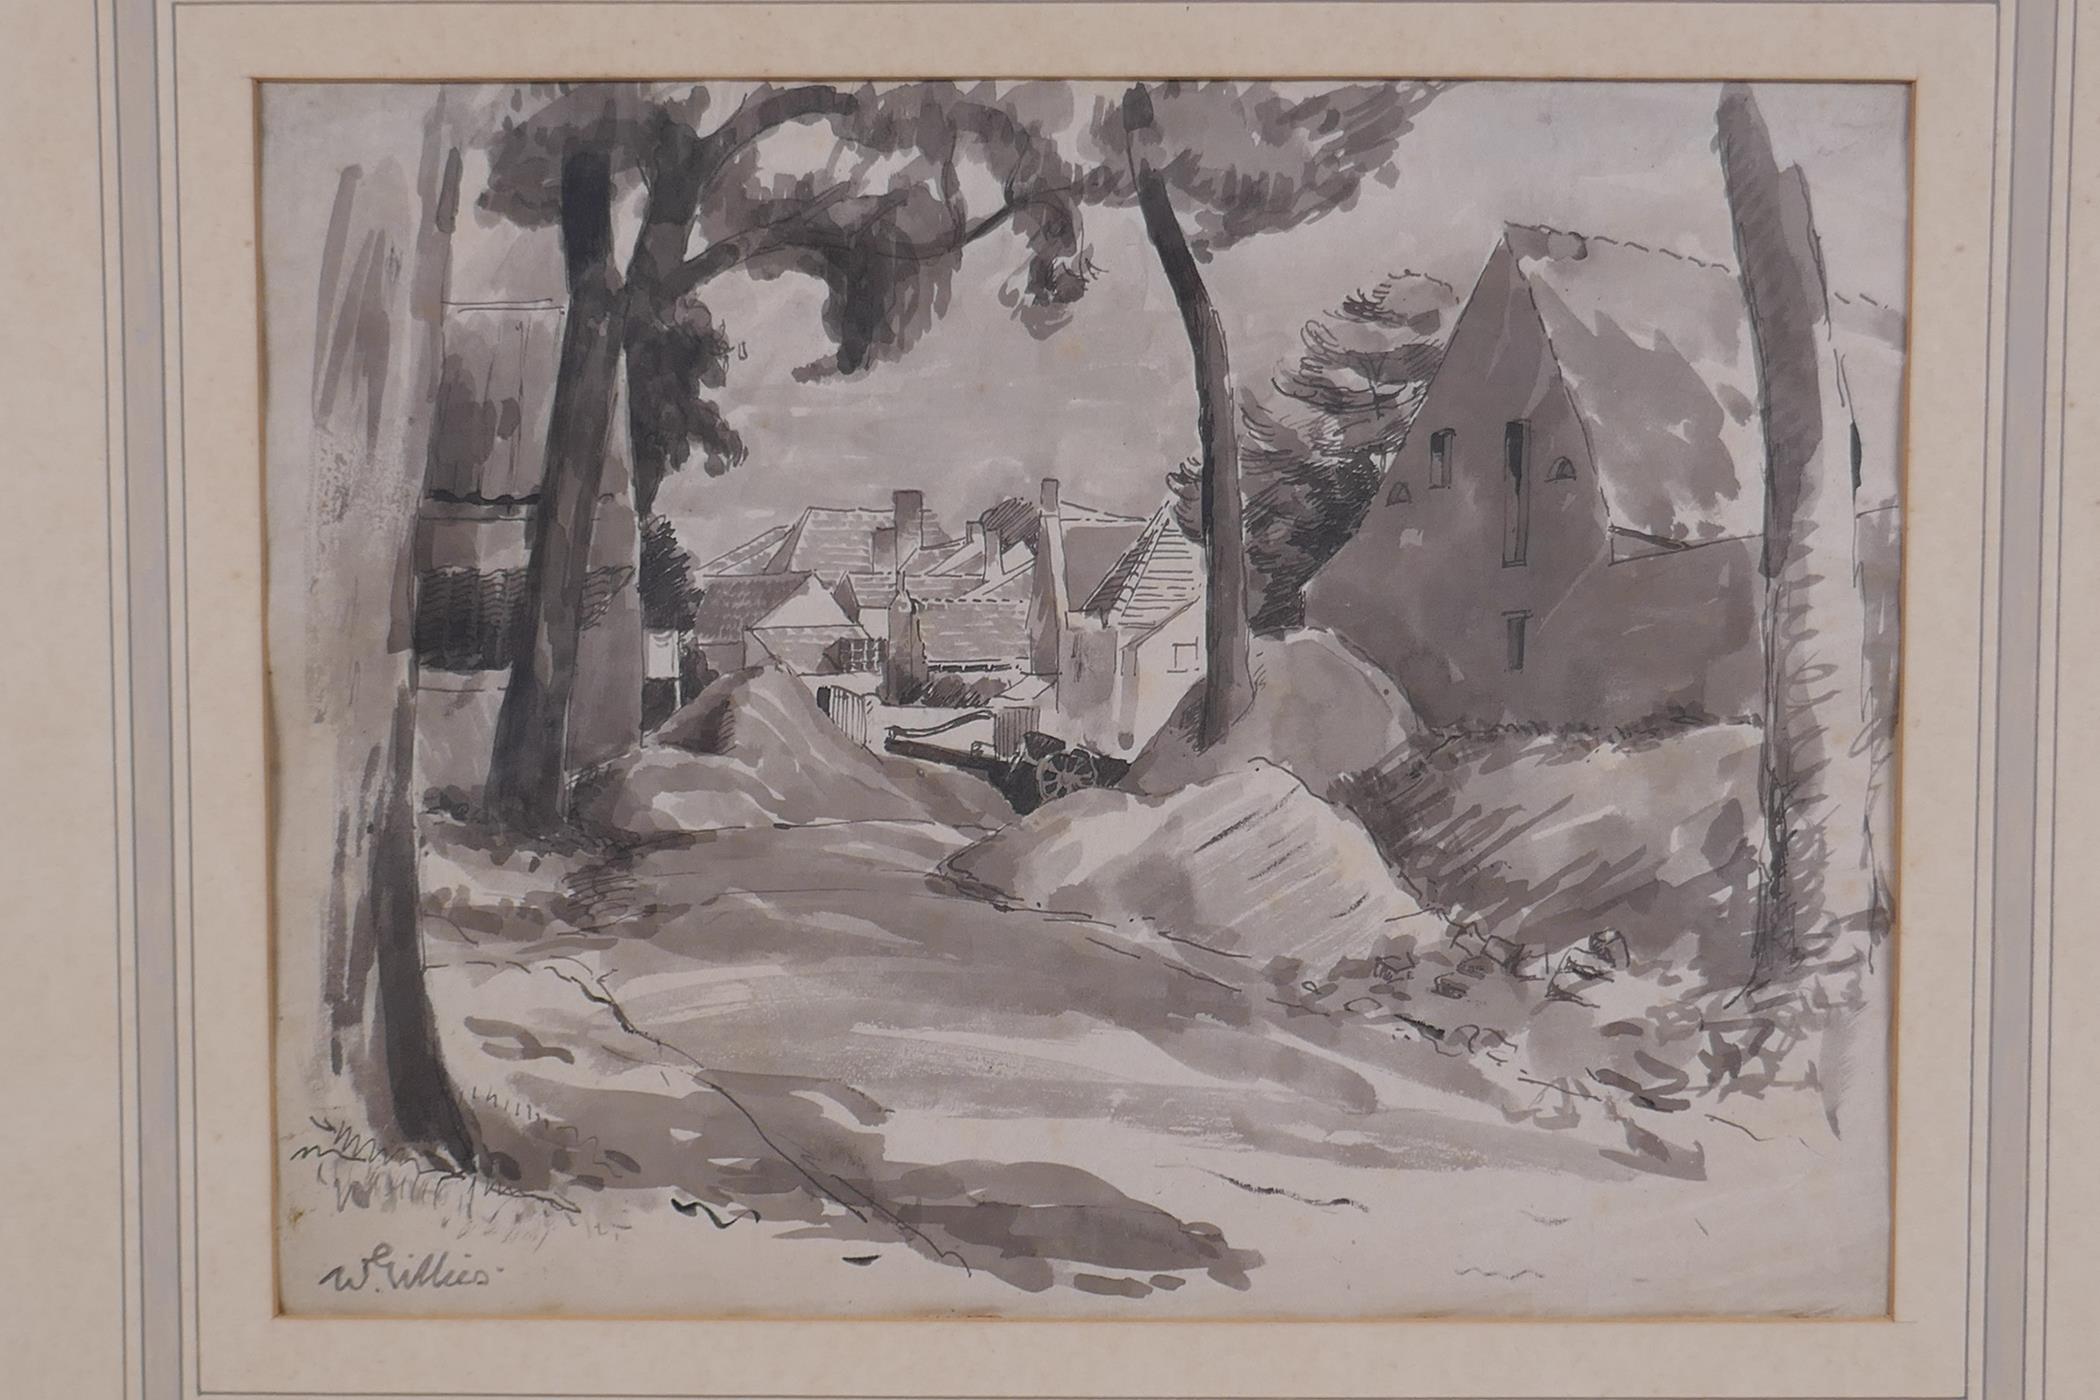 Pathway to a village, signed W. Gillies, ink and wash drawing, unframed, 20 x 27cm - Image 2 of 4